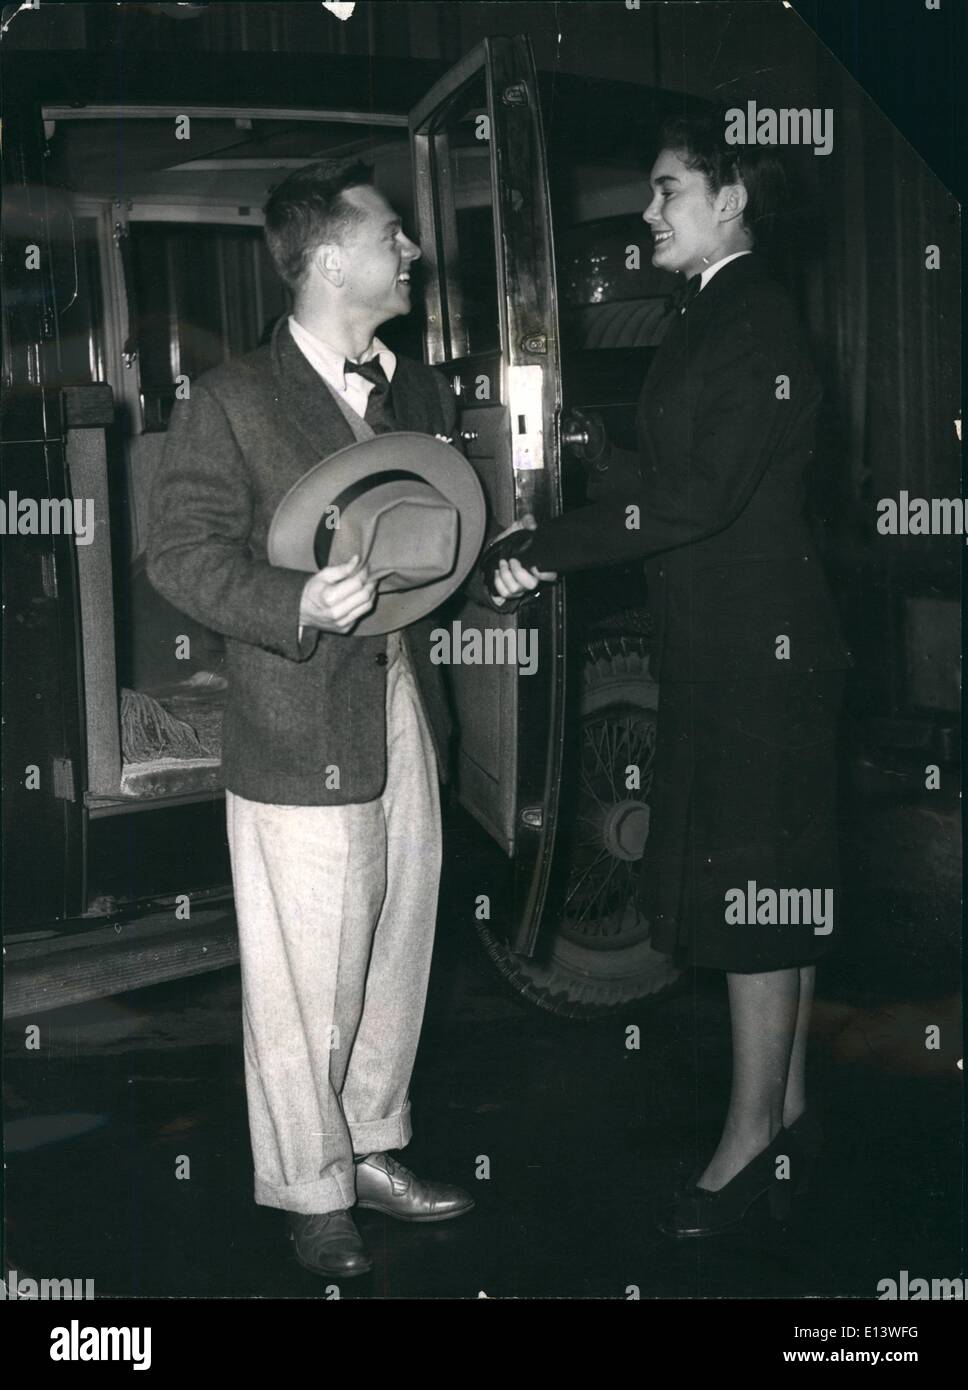 Mar. 27, 2012 - No. 1 Car Hostess has Mickey Rooney as First Assignment. Pioneer of a brand new career for girls, Tessa Howard, Stock Photo